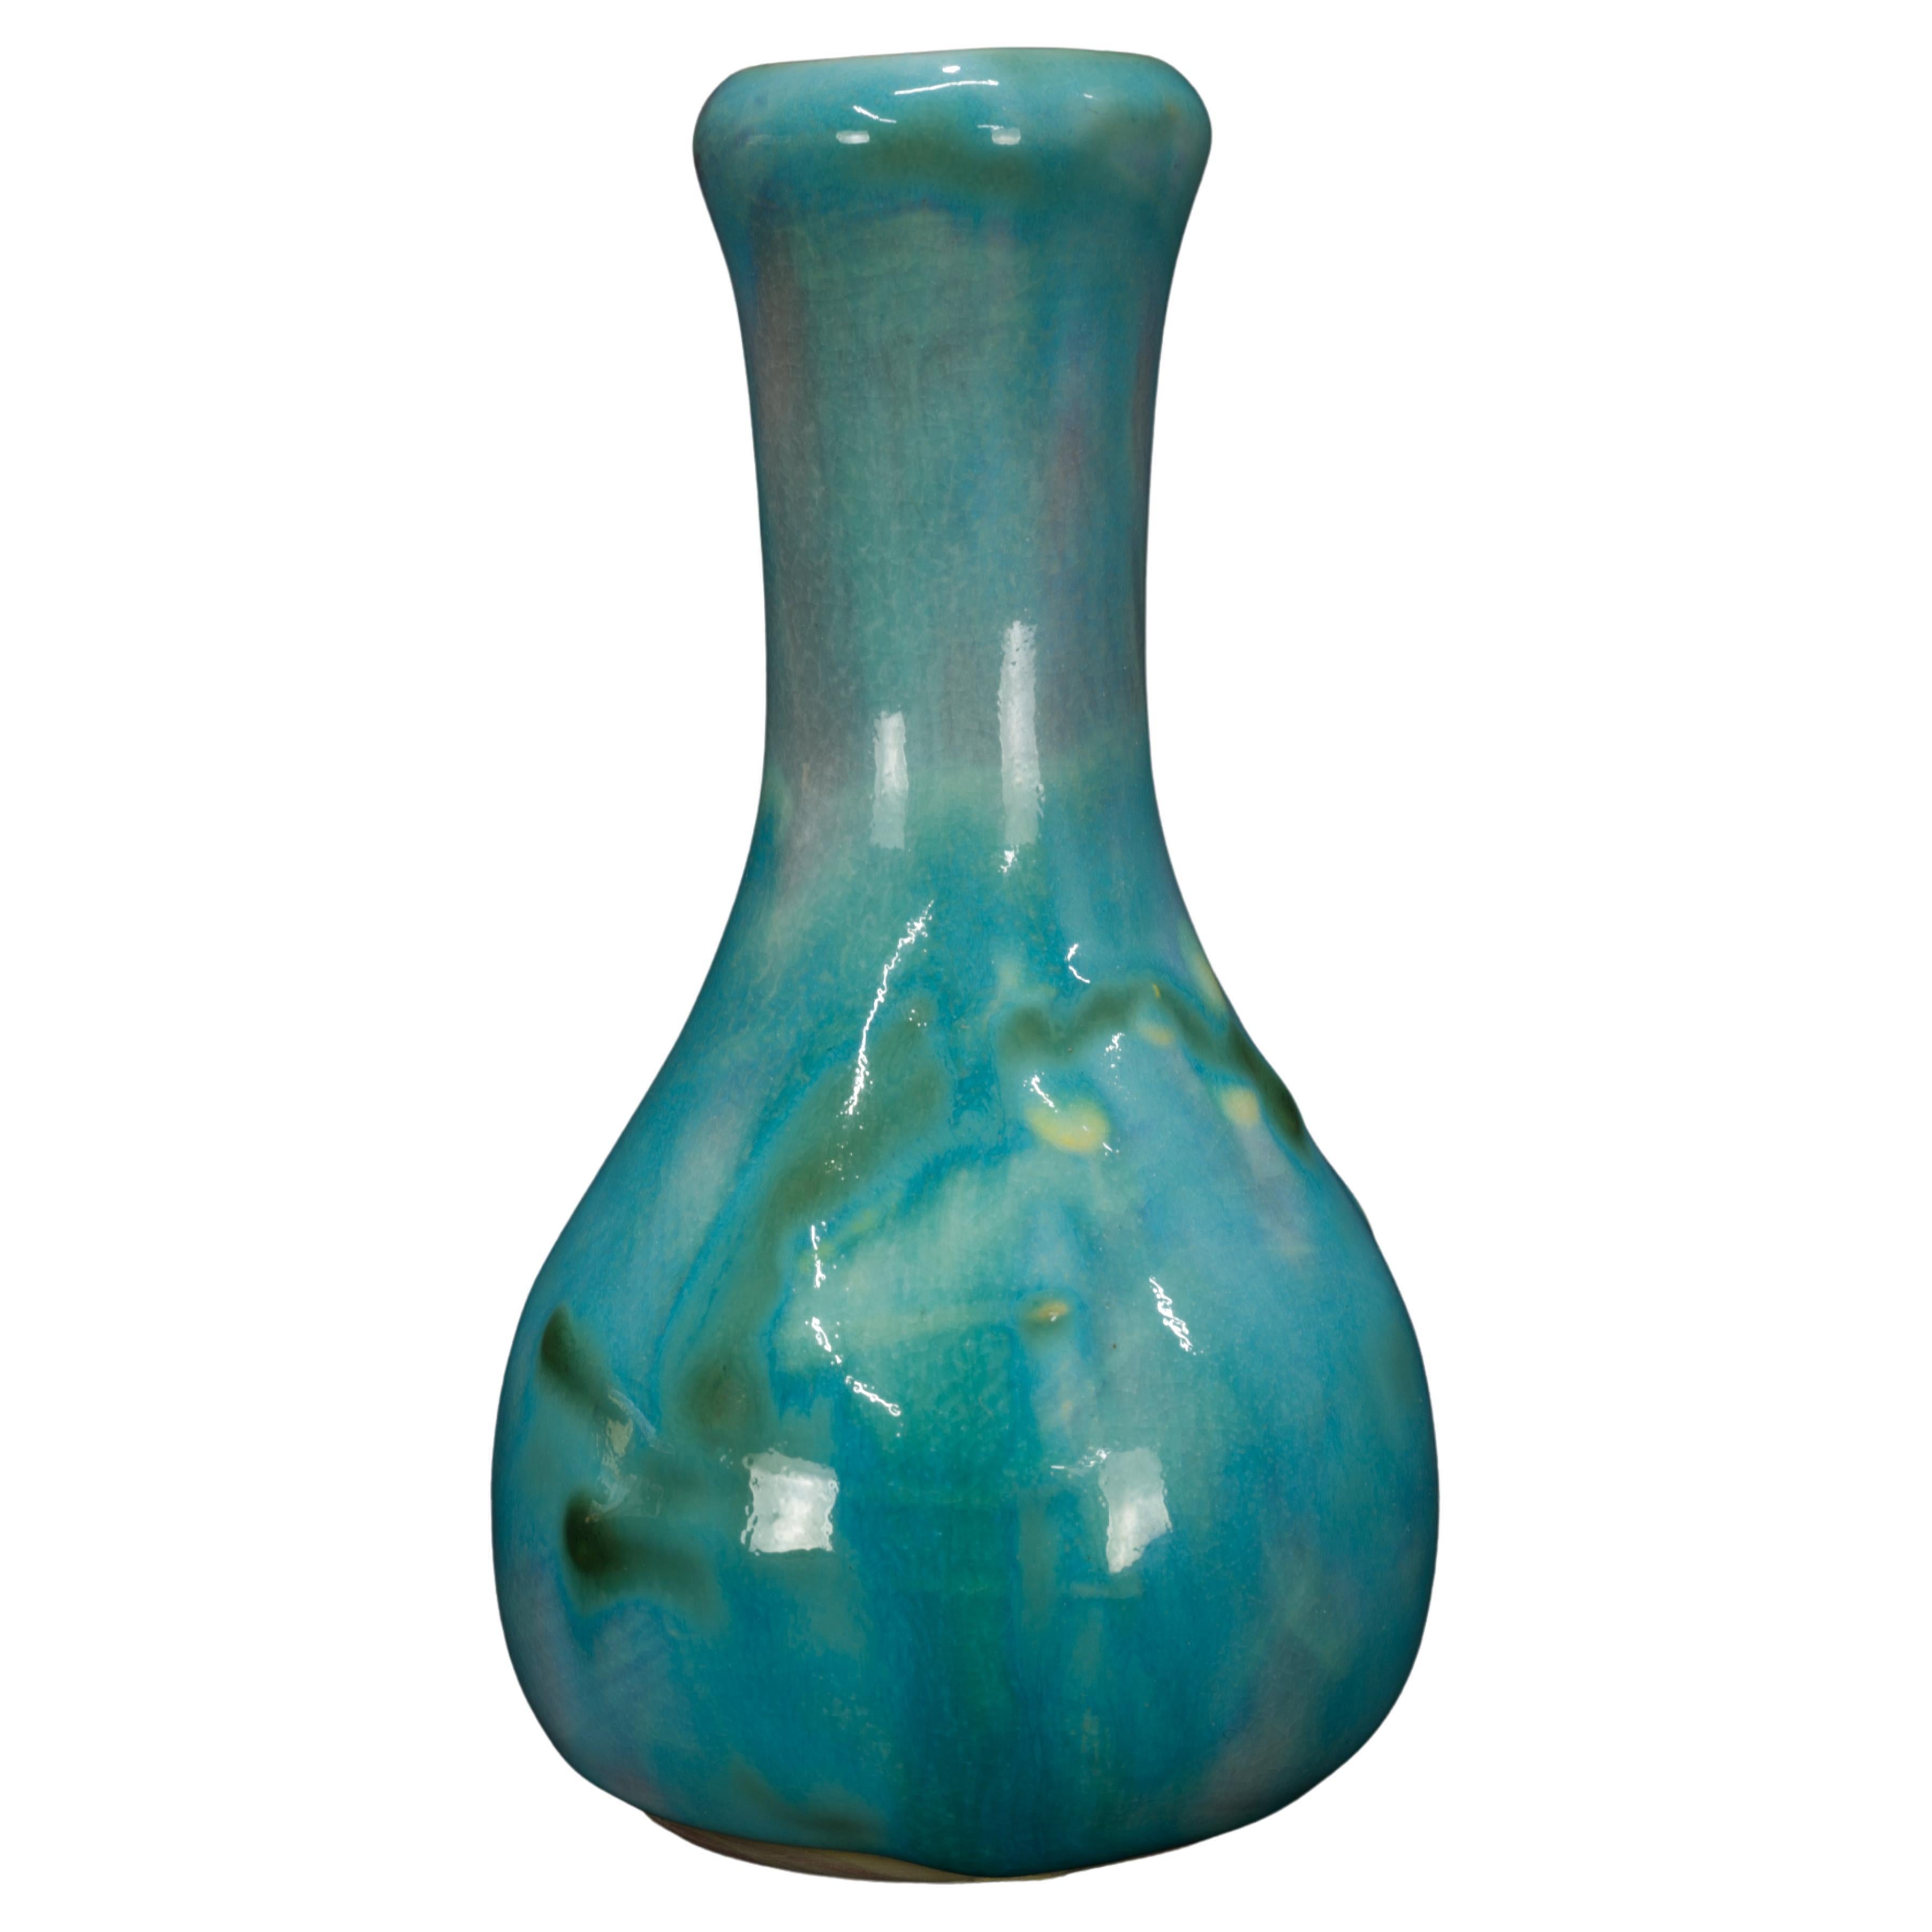 Caribbean Vases and Vessels